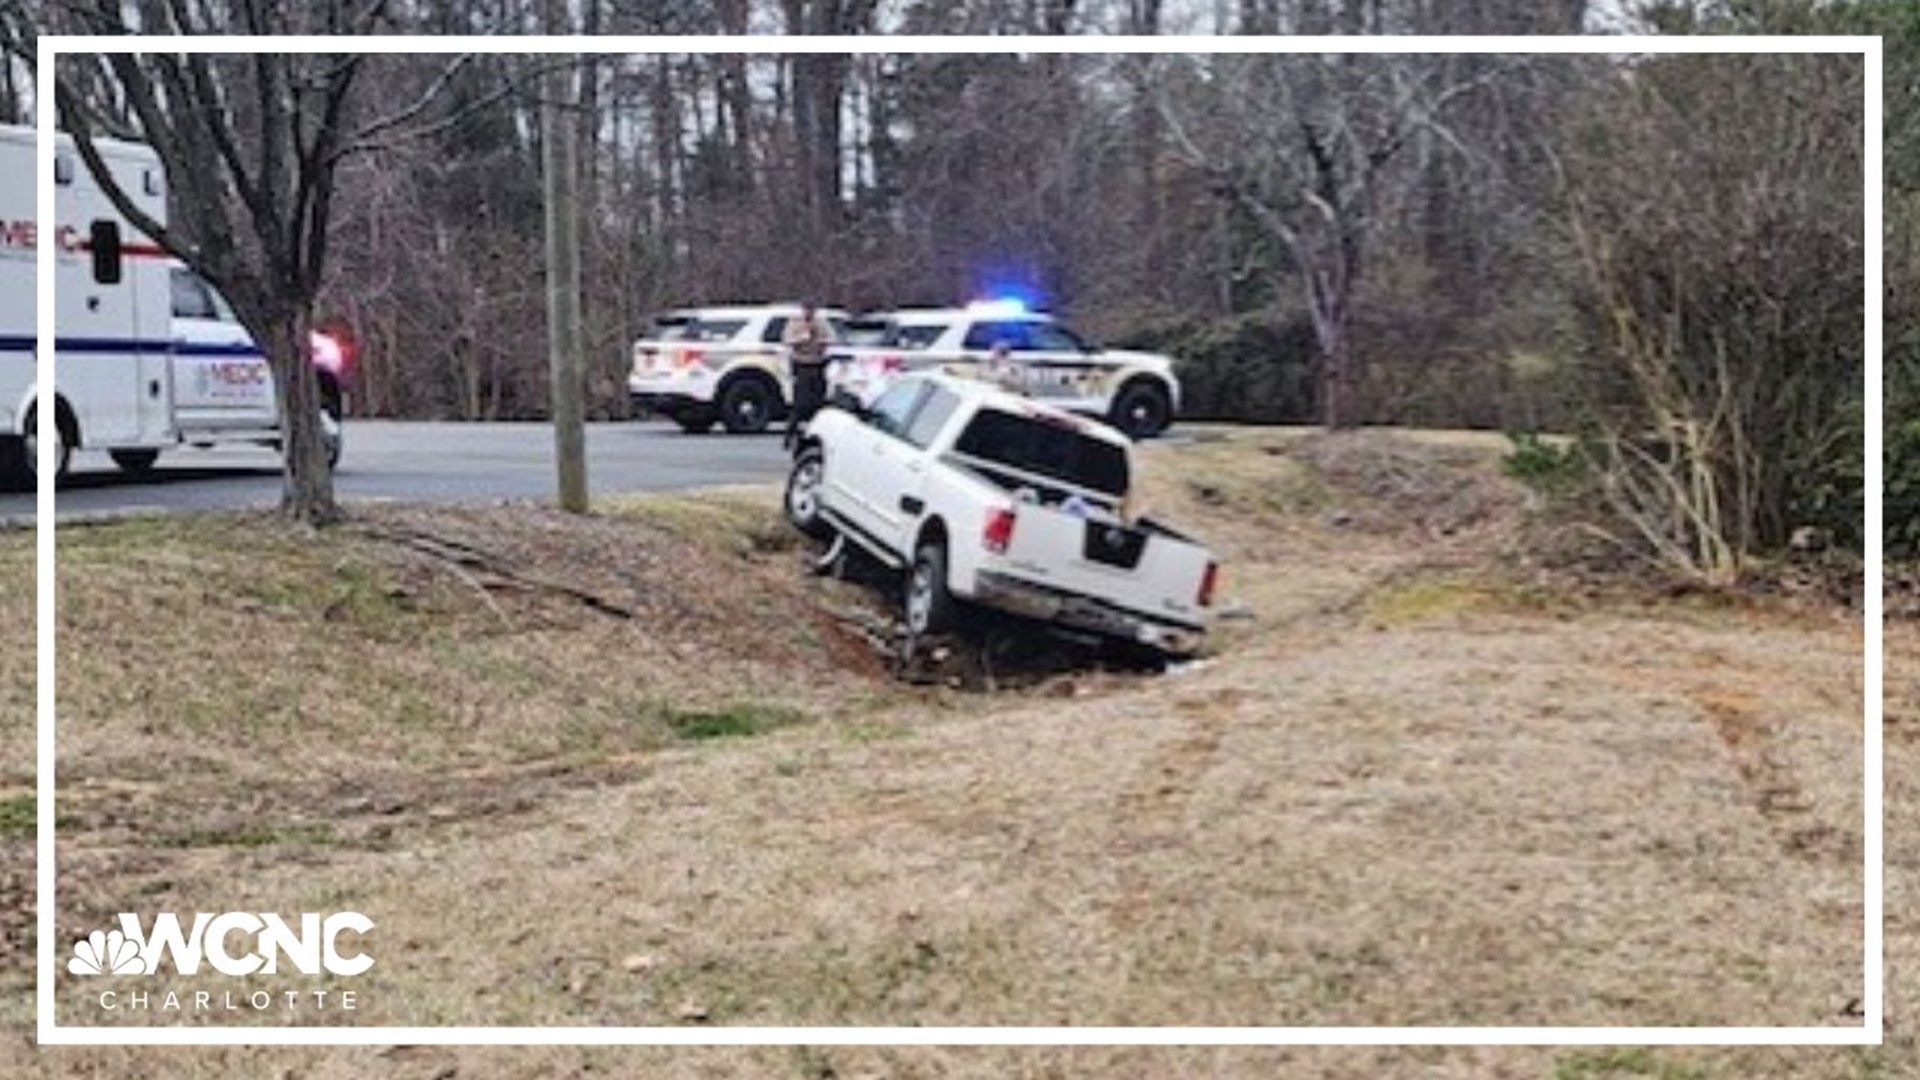 Two people were arrested after a high-speed police chase that stemmed from alleged shoplifting at Publix ended with a crash in Mecklenburg County, investigators say.